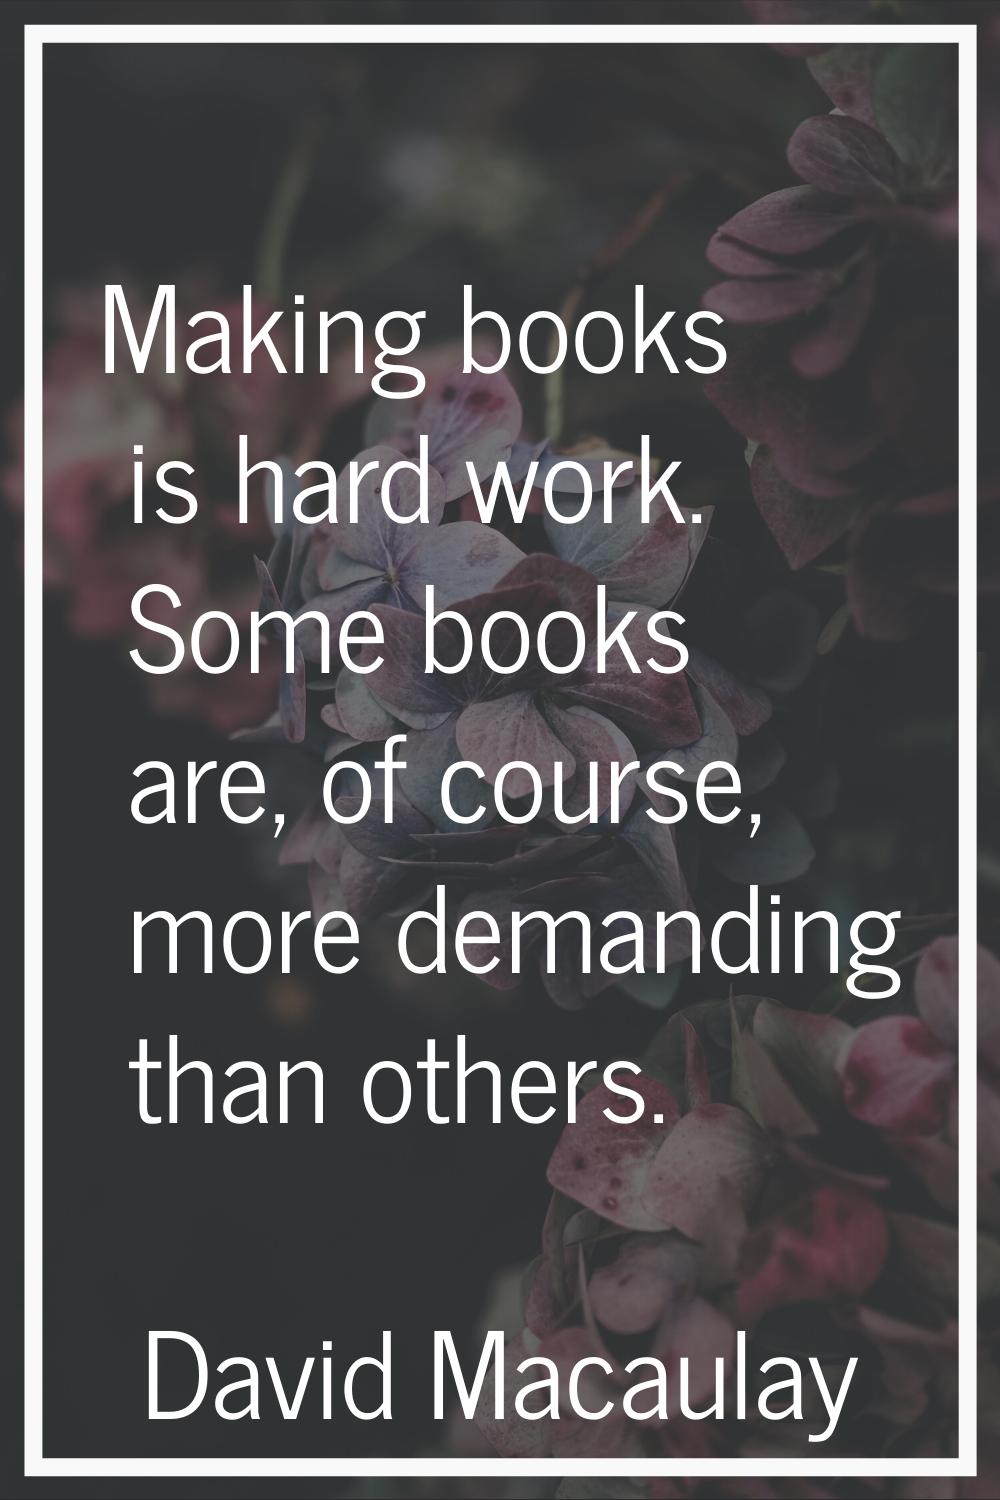 Making books is hard work. Some books are, of course, more demanding than others.